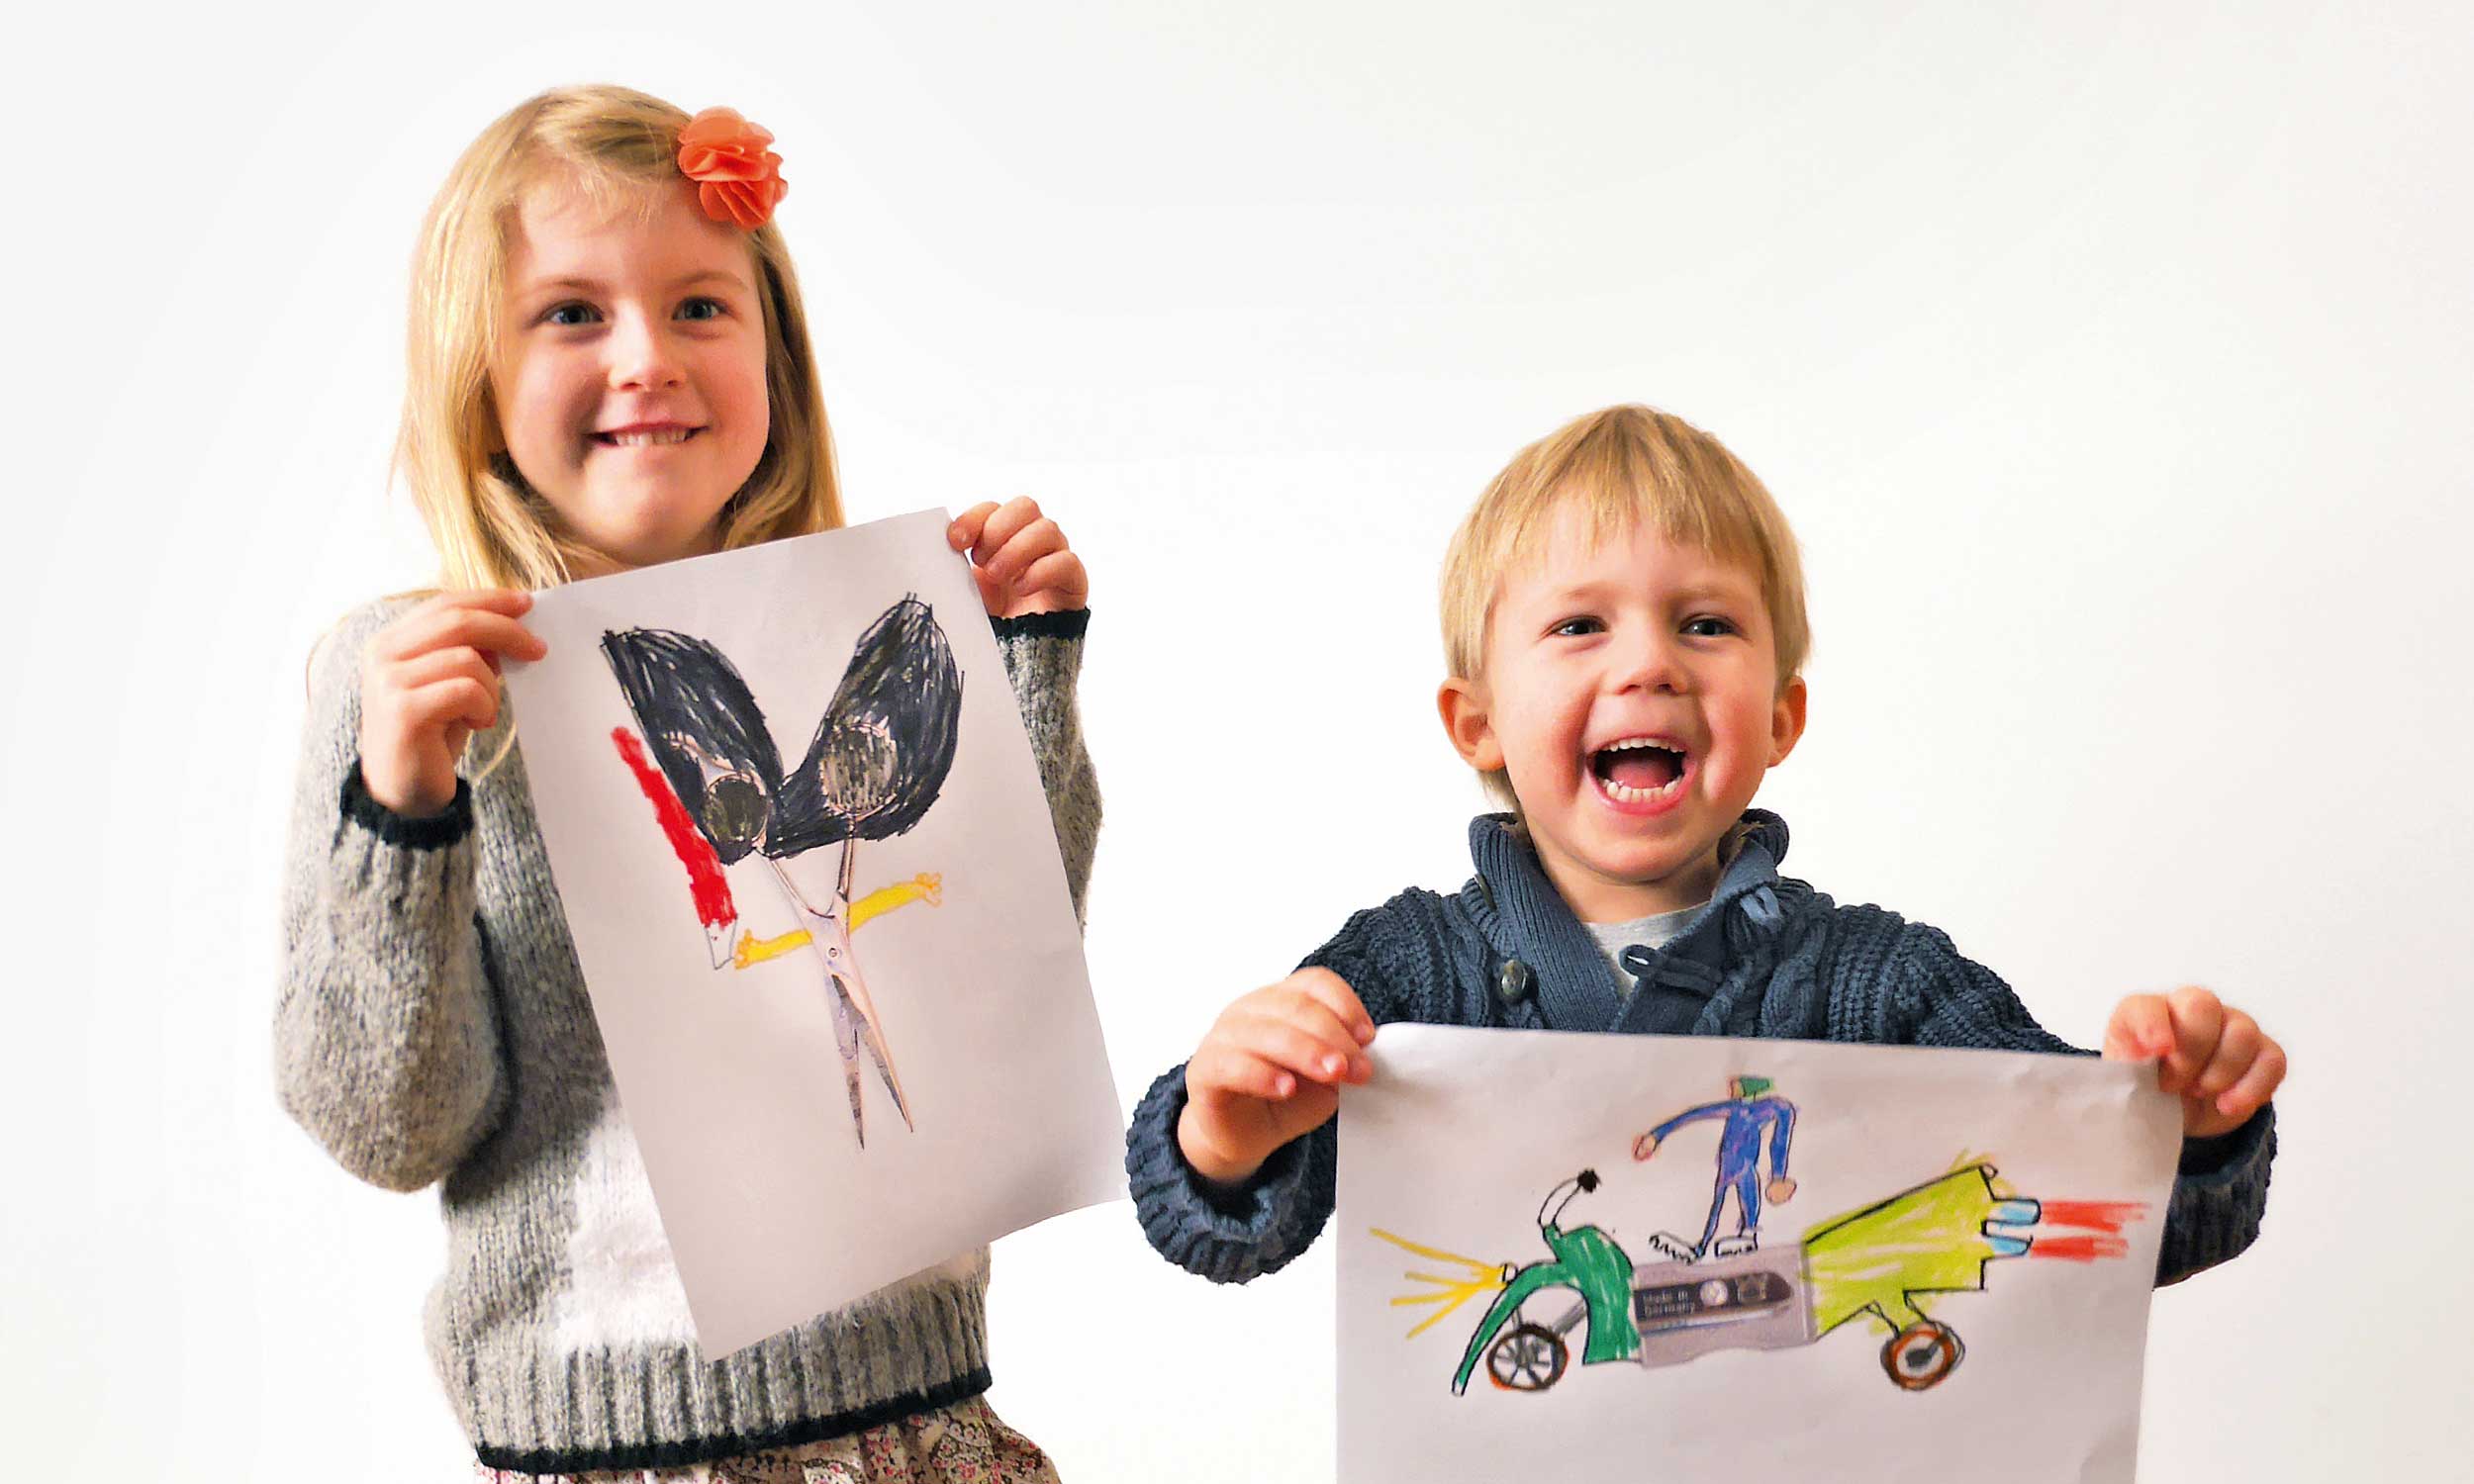 Two children proudly hold their self-painted pictures in their hands.